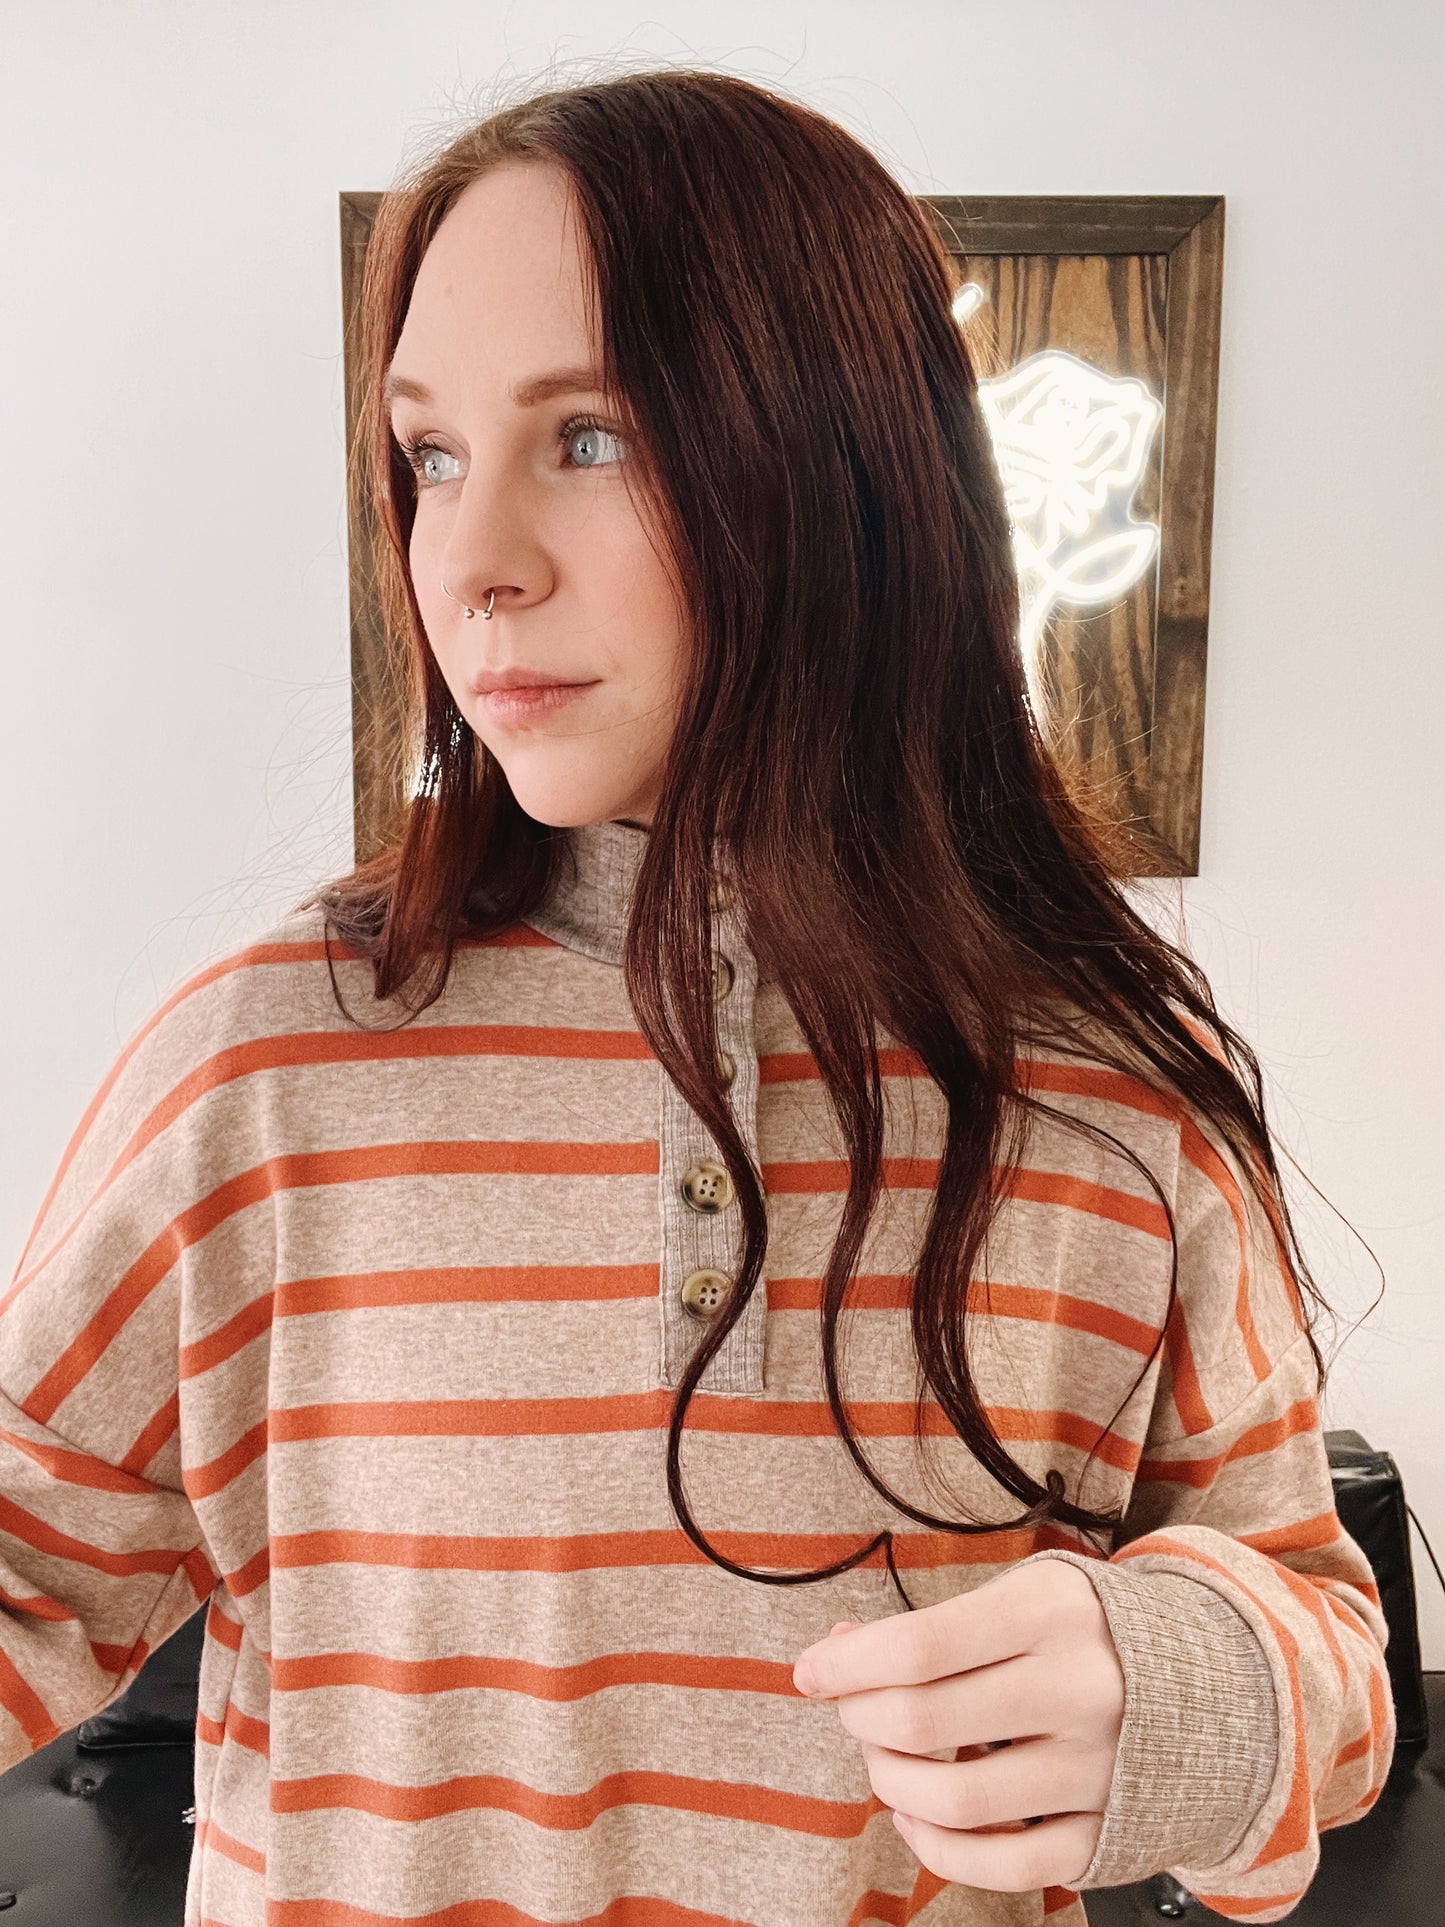 henry striped top